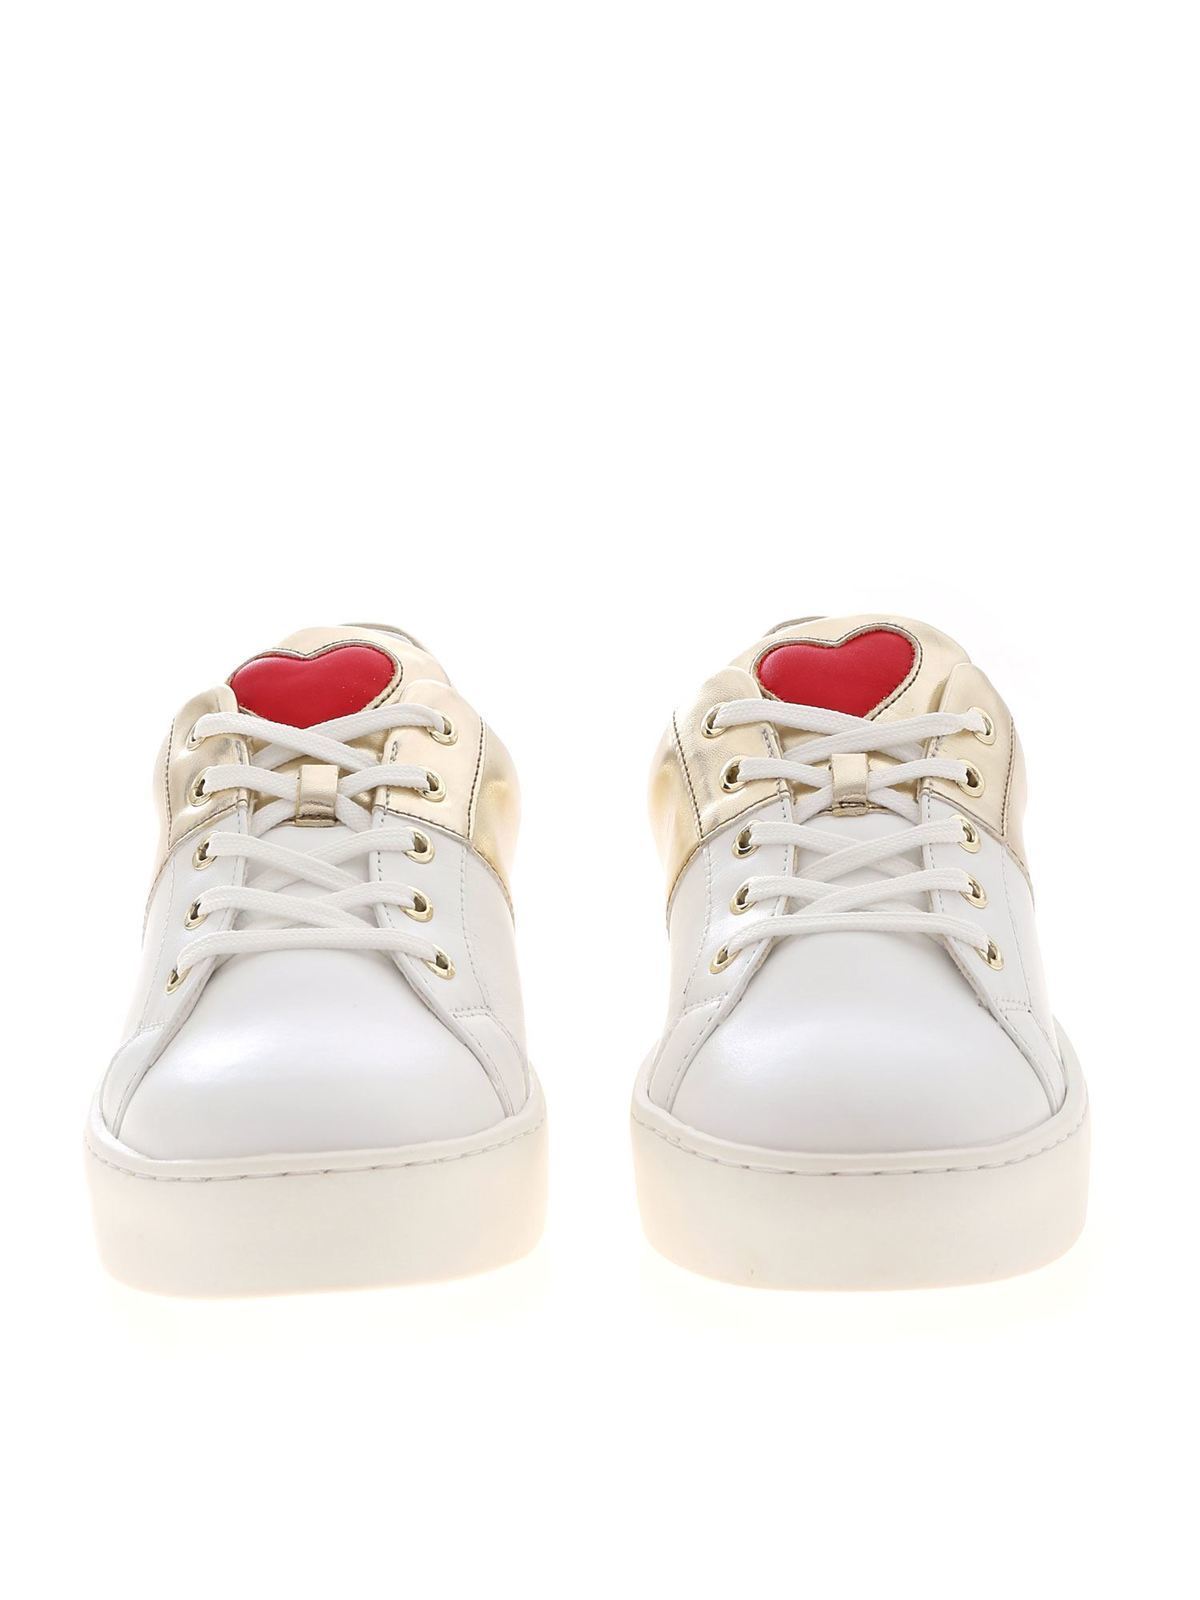 Bezit Garderobe hoogte Trainers Love Moschino - Bicolor sneakers in white and gold with logo -  JA15013G1AIF310A